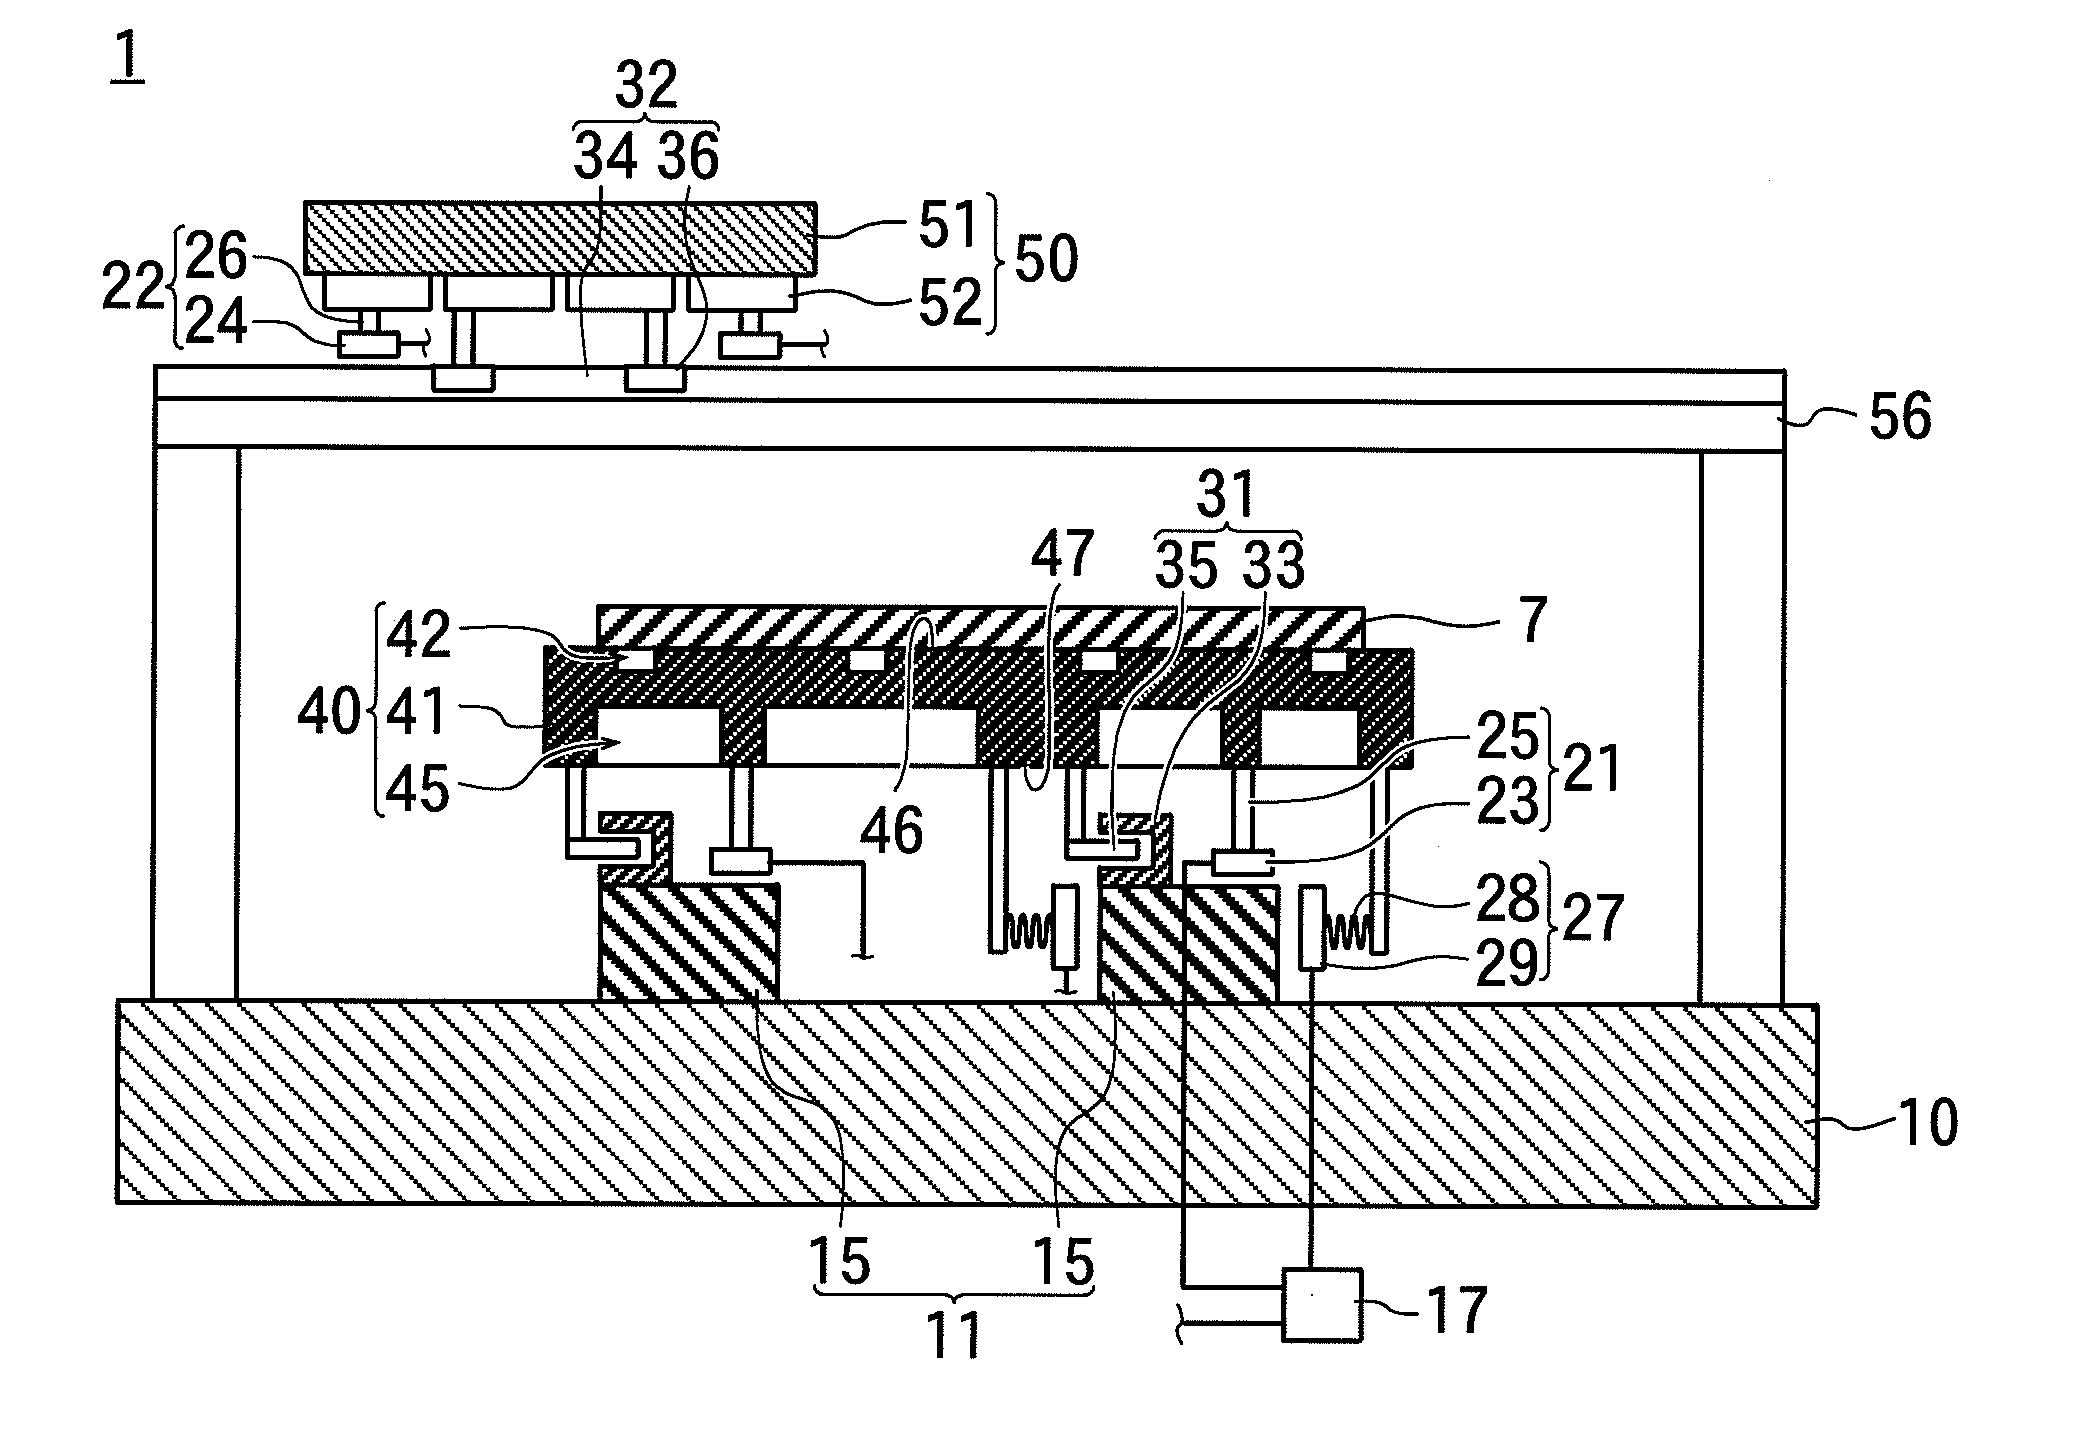 Substrate transfer processing apparatus